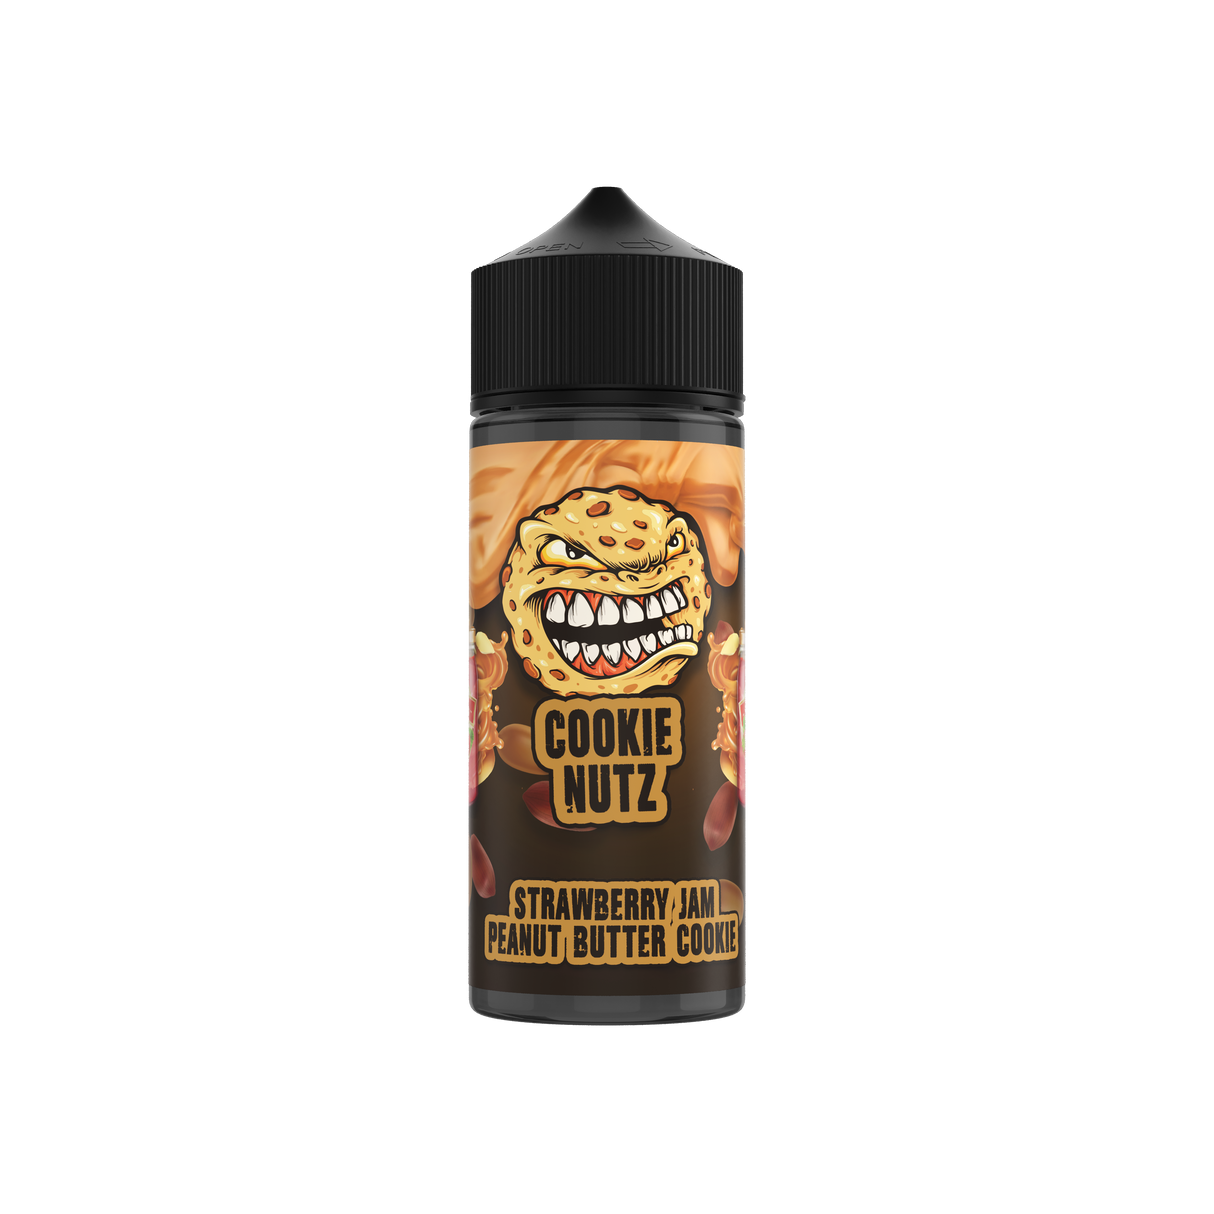 Cookie Nutz - Peanut Butter Cookie and Strawberry Jam - 100ml